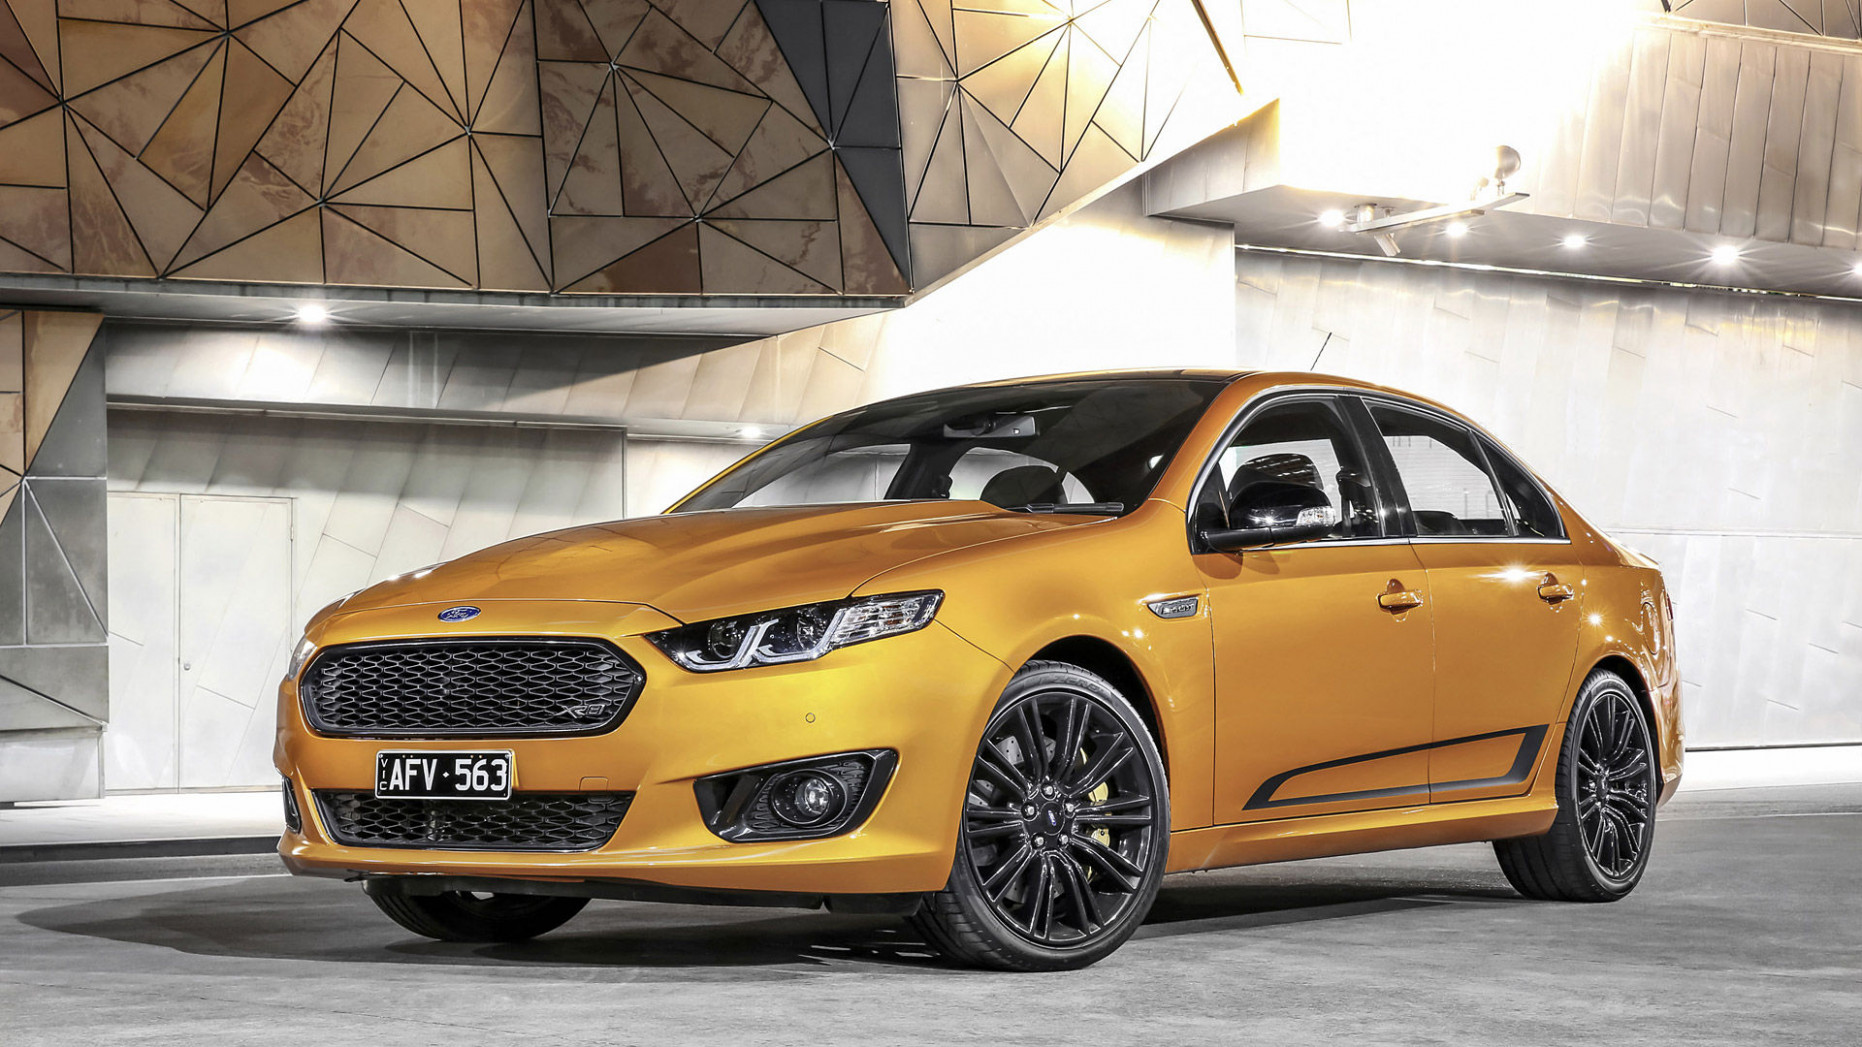 Model 2022 Ford Falcon Xr8 Gt New Cars Design